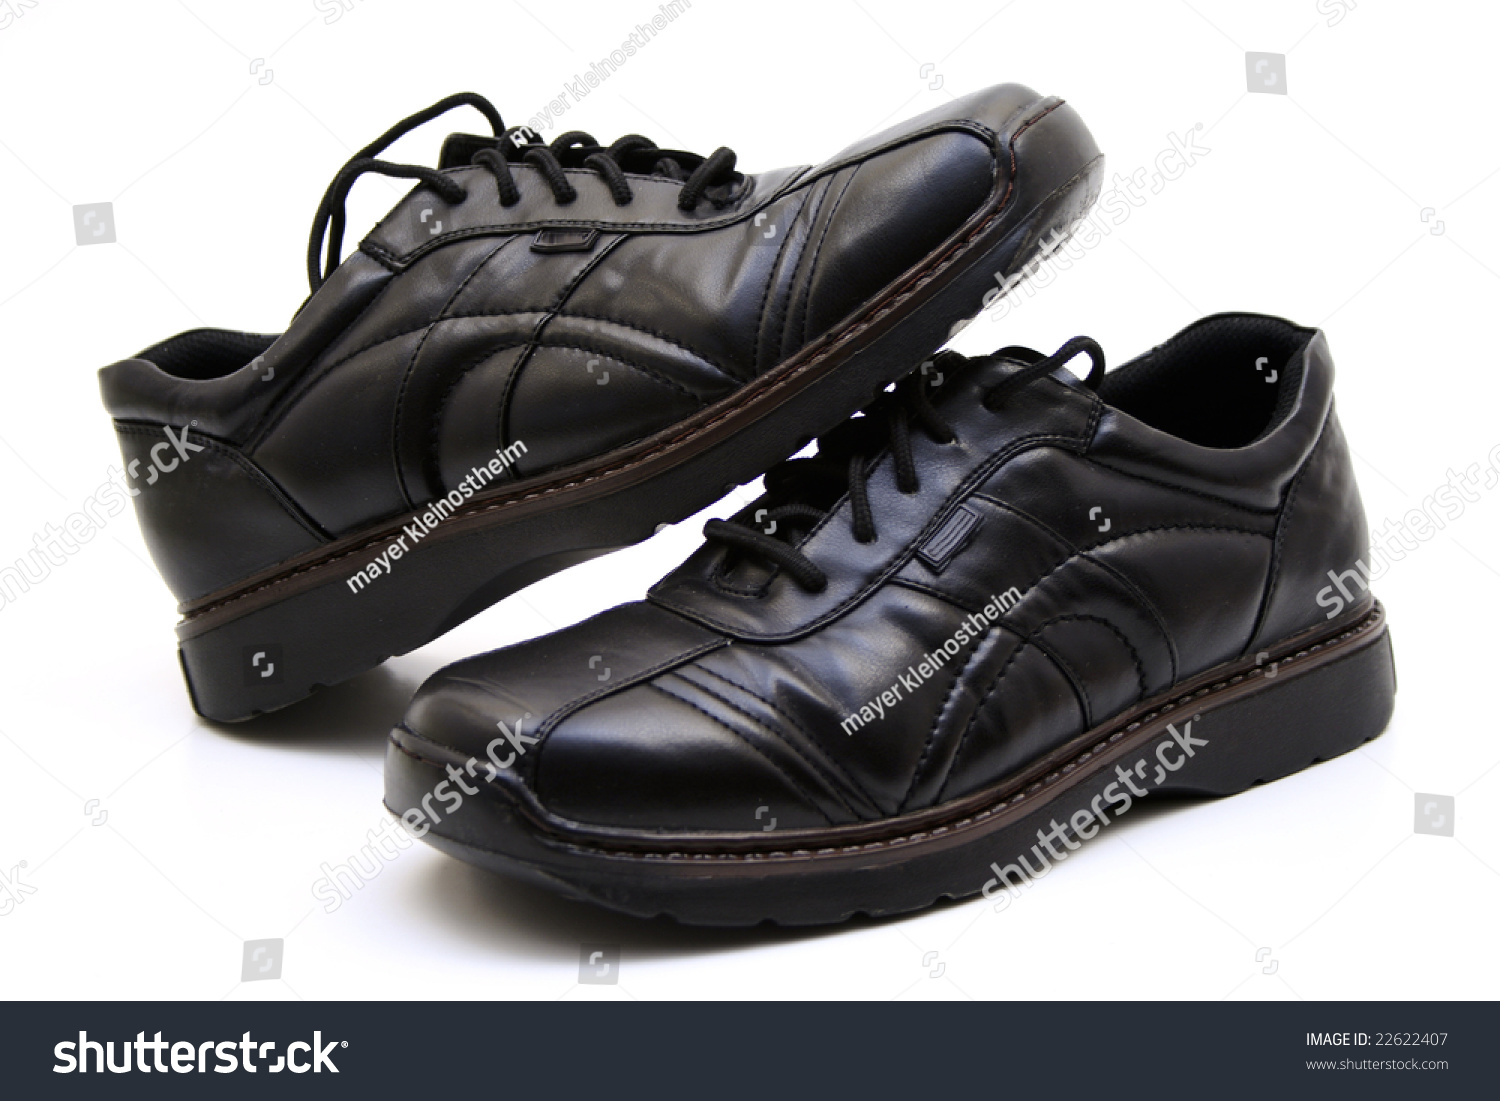 Gent Shoes Stock Photo 22622407 : Shutterstock